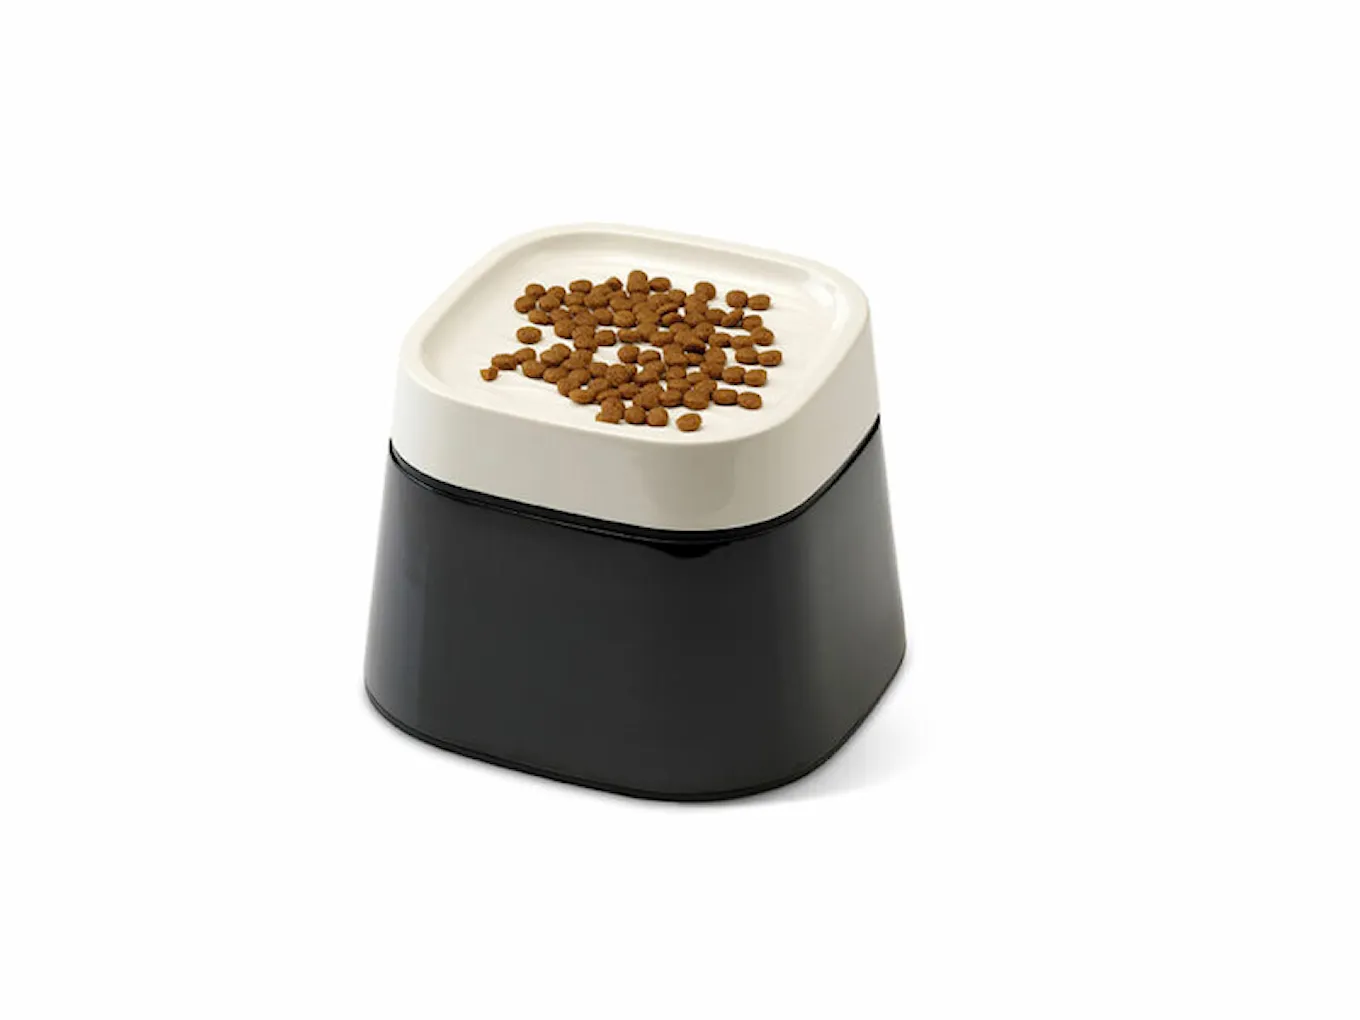 savic_dogs_cats_foodbowl_ergo_cube_elevated_002.jp